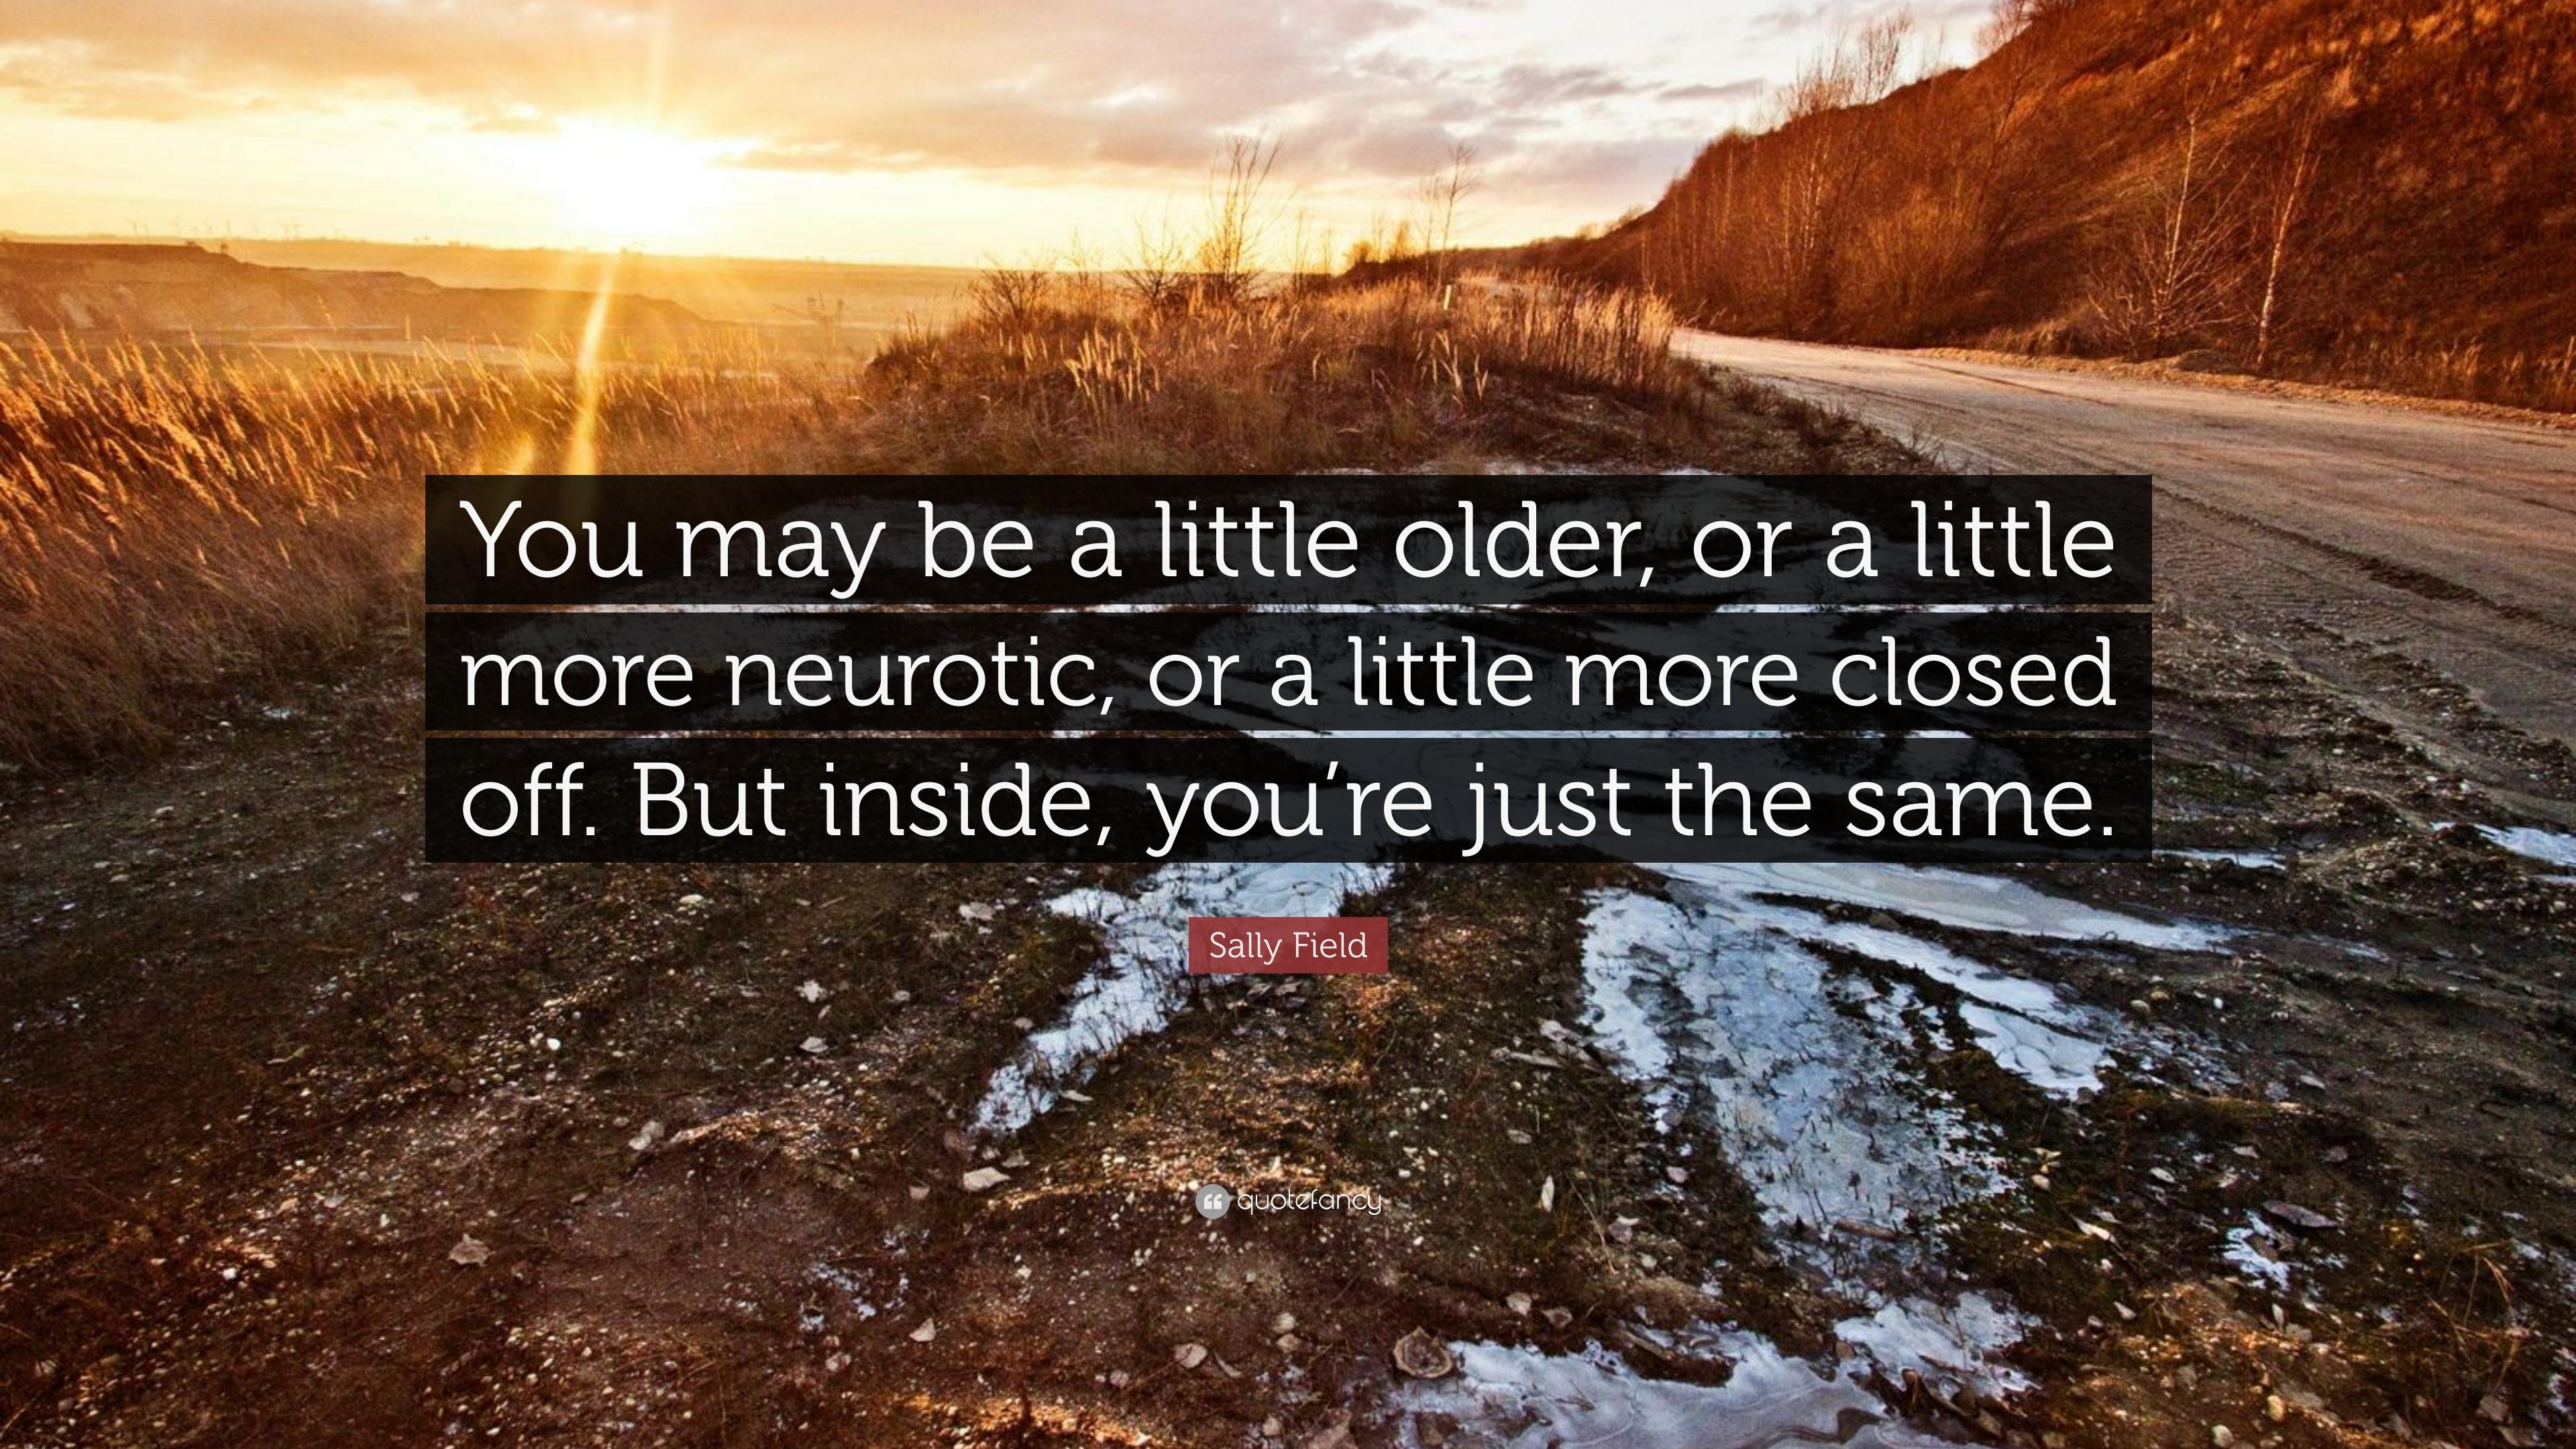 Sally Field Quote: “You may be a little older, or a little more